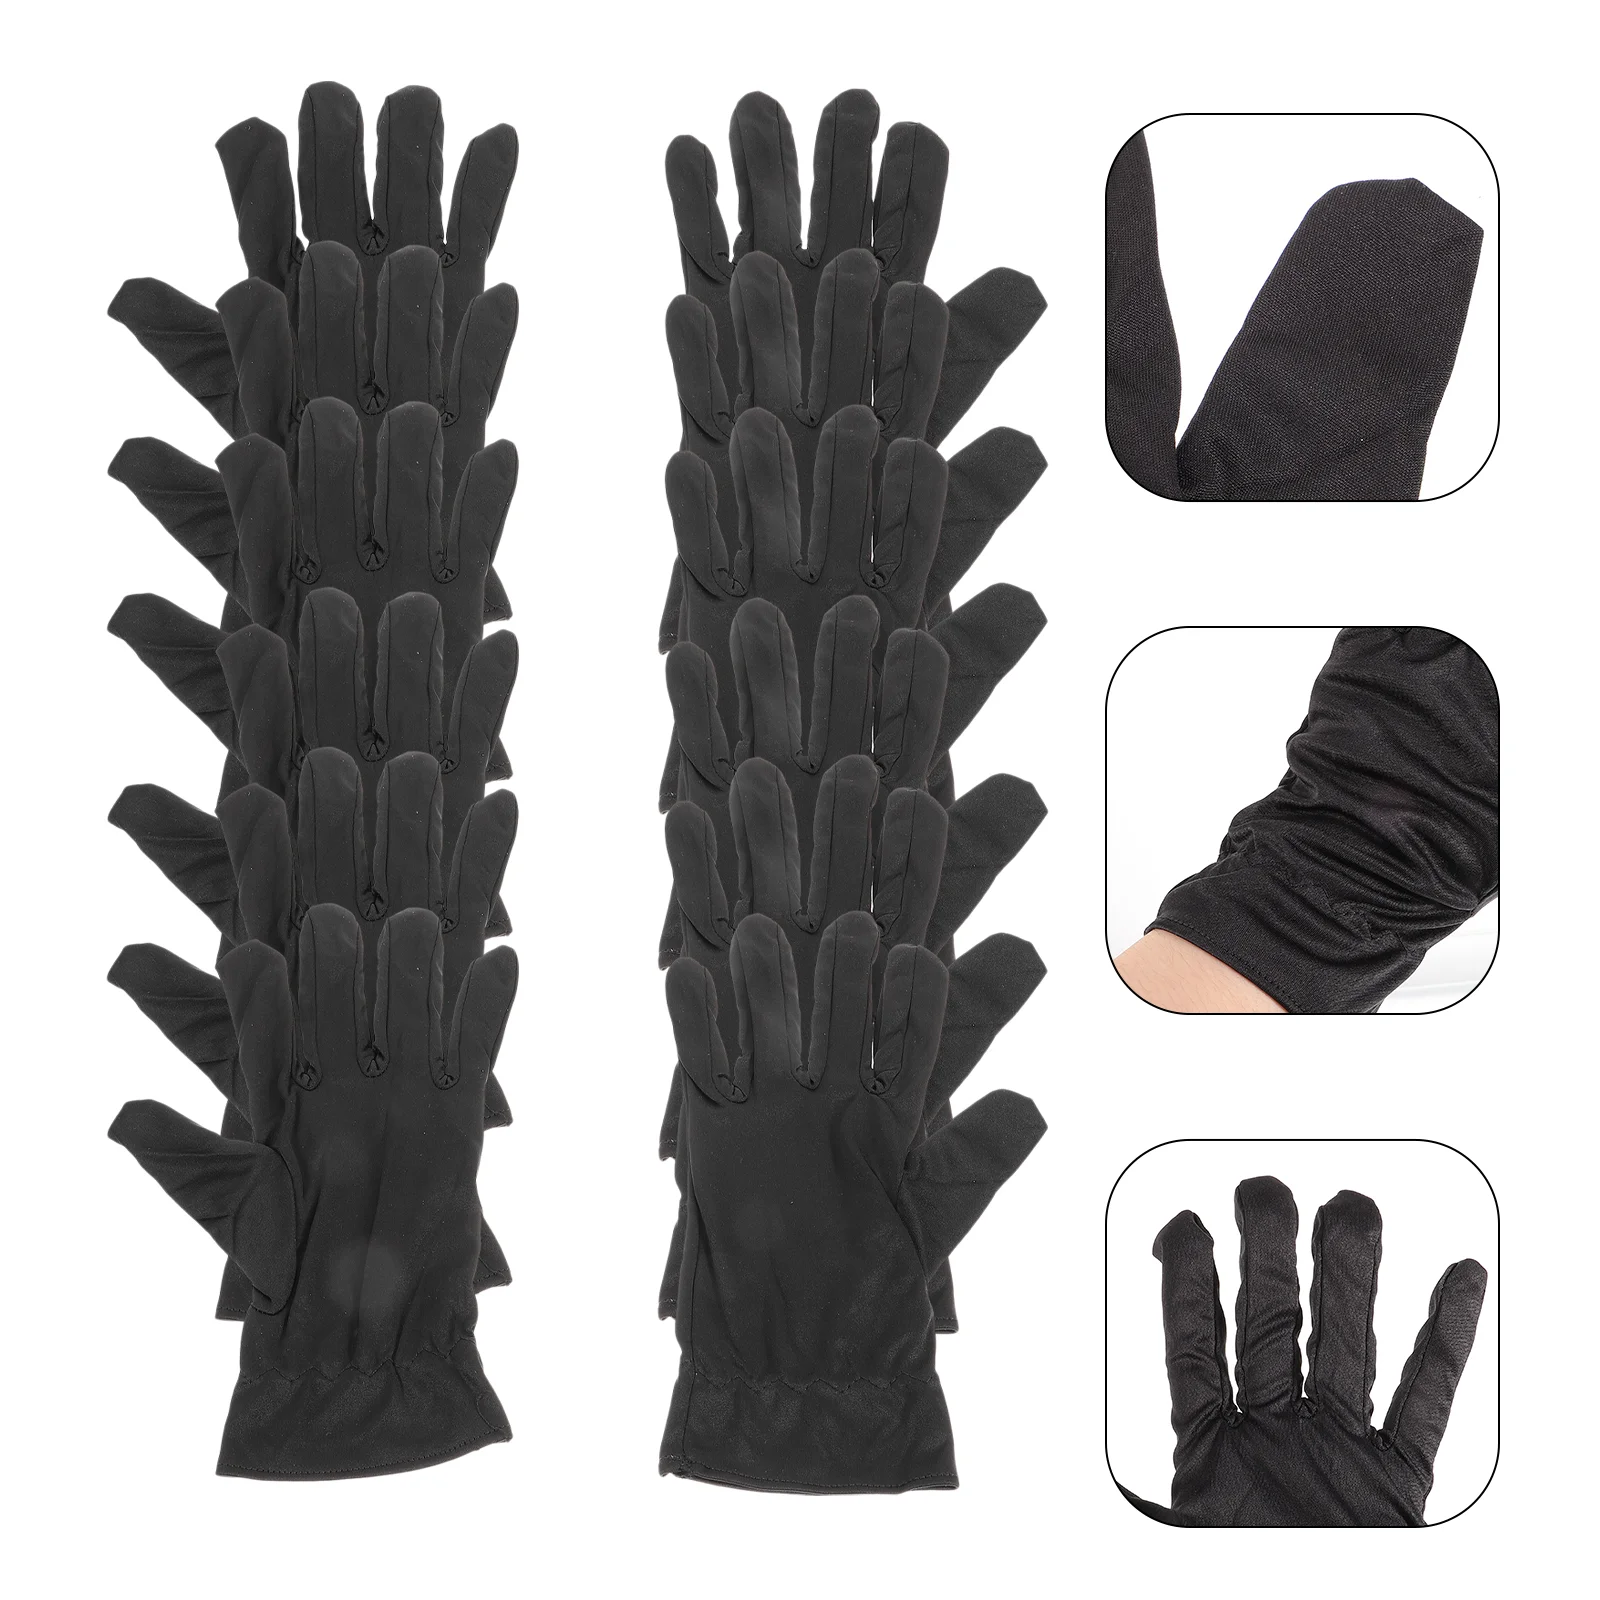 

6 Pairs Accessories Cotton Moisturizing Gloves For Dry Hands Jewelry Handling Testing Kit Inspection Clean Cotton Coin Black